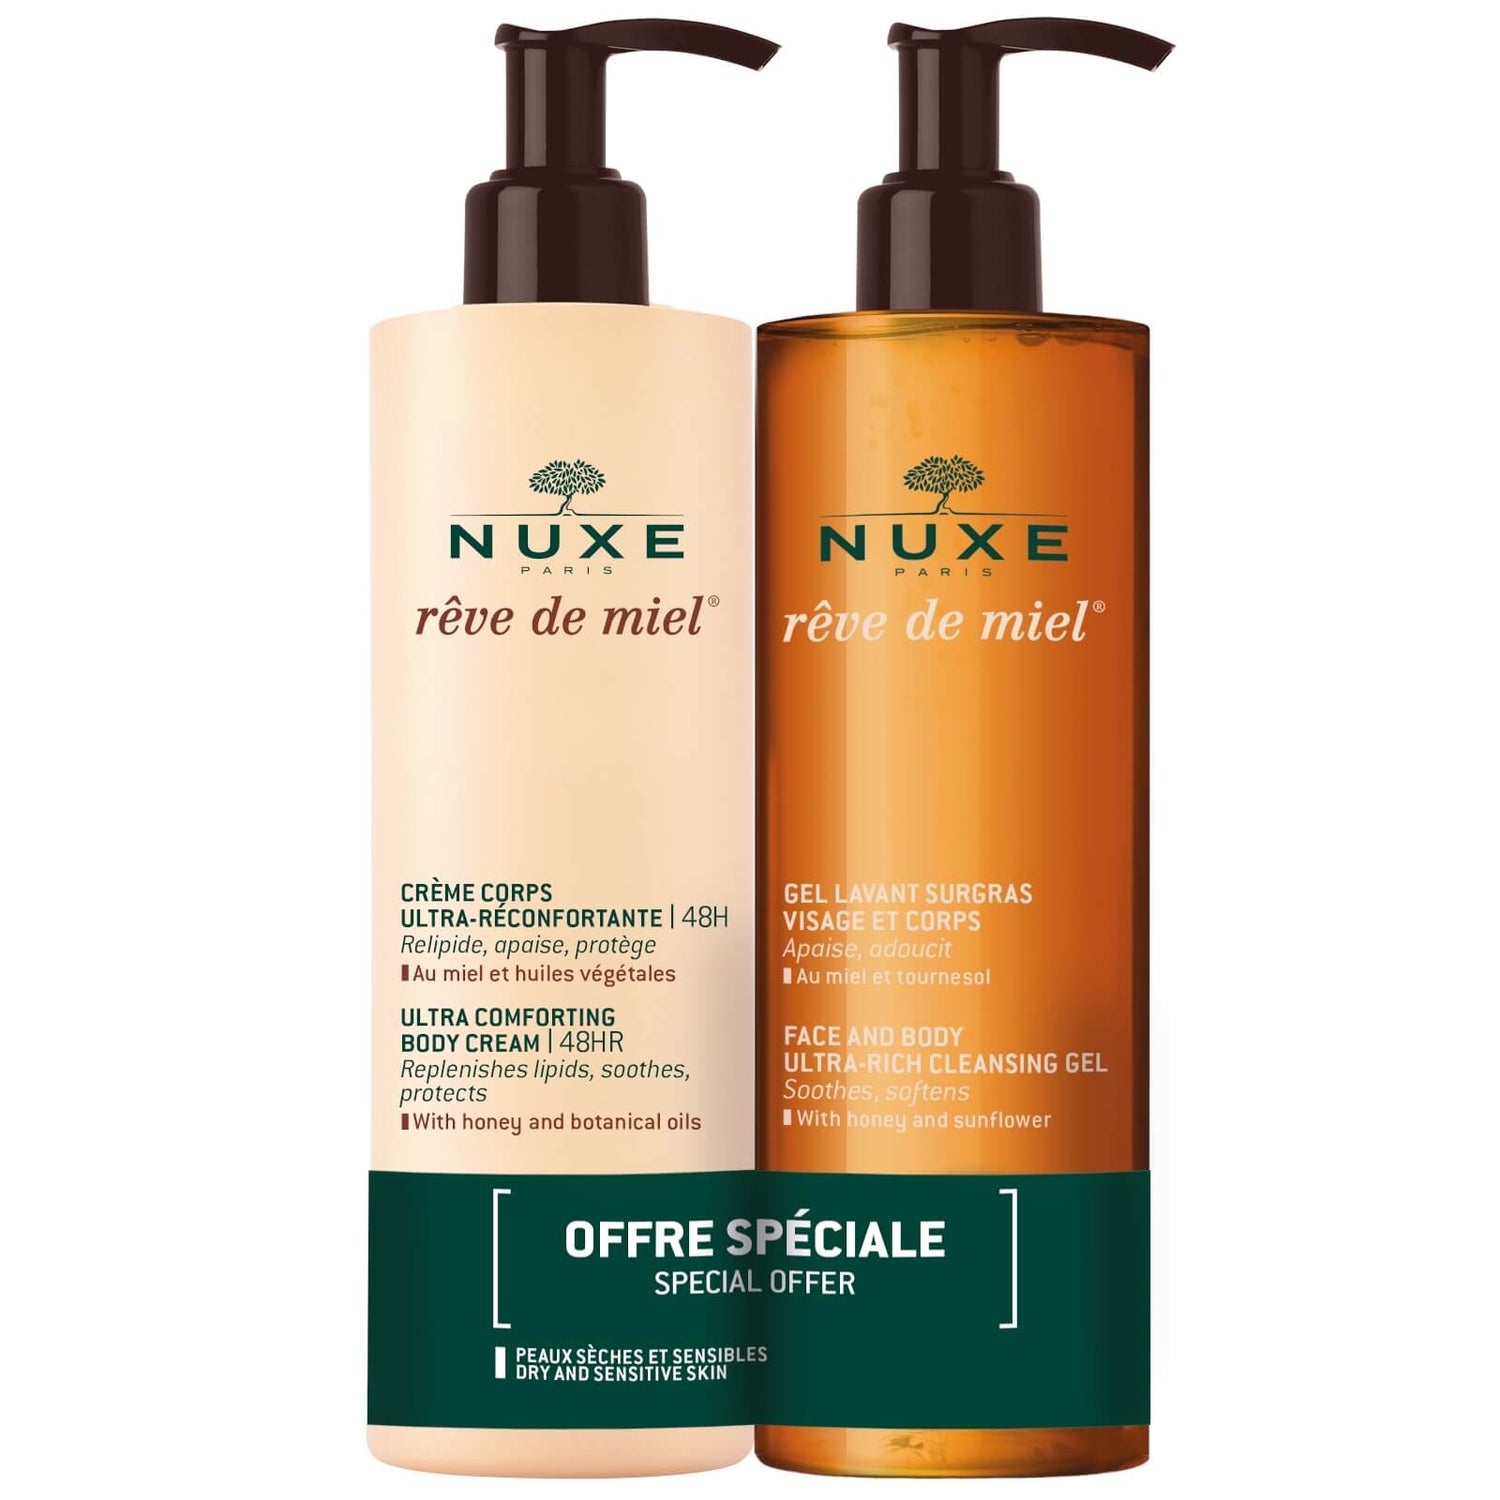 NUXE Duo Face and Body Cleansing Gel + Body Comforting Cream 48H Rêve de Miel®